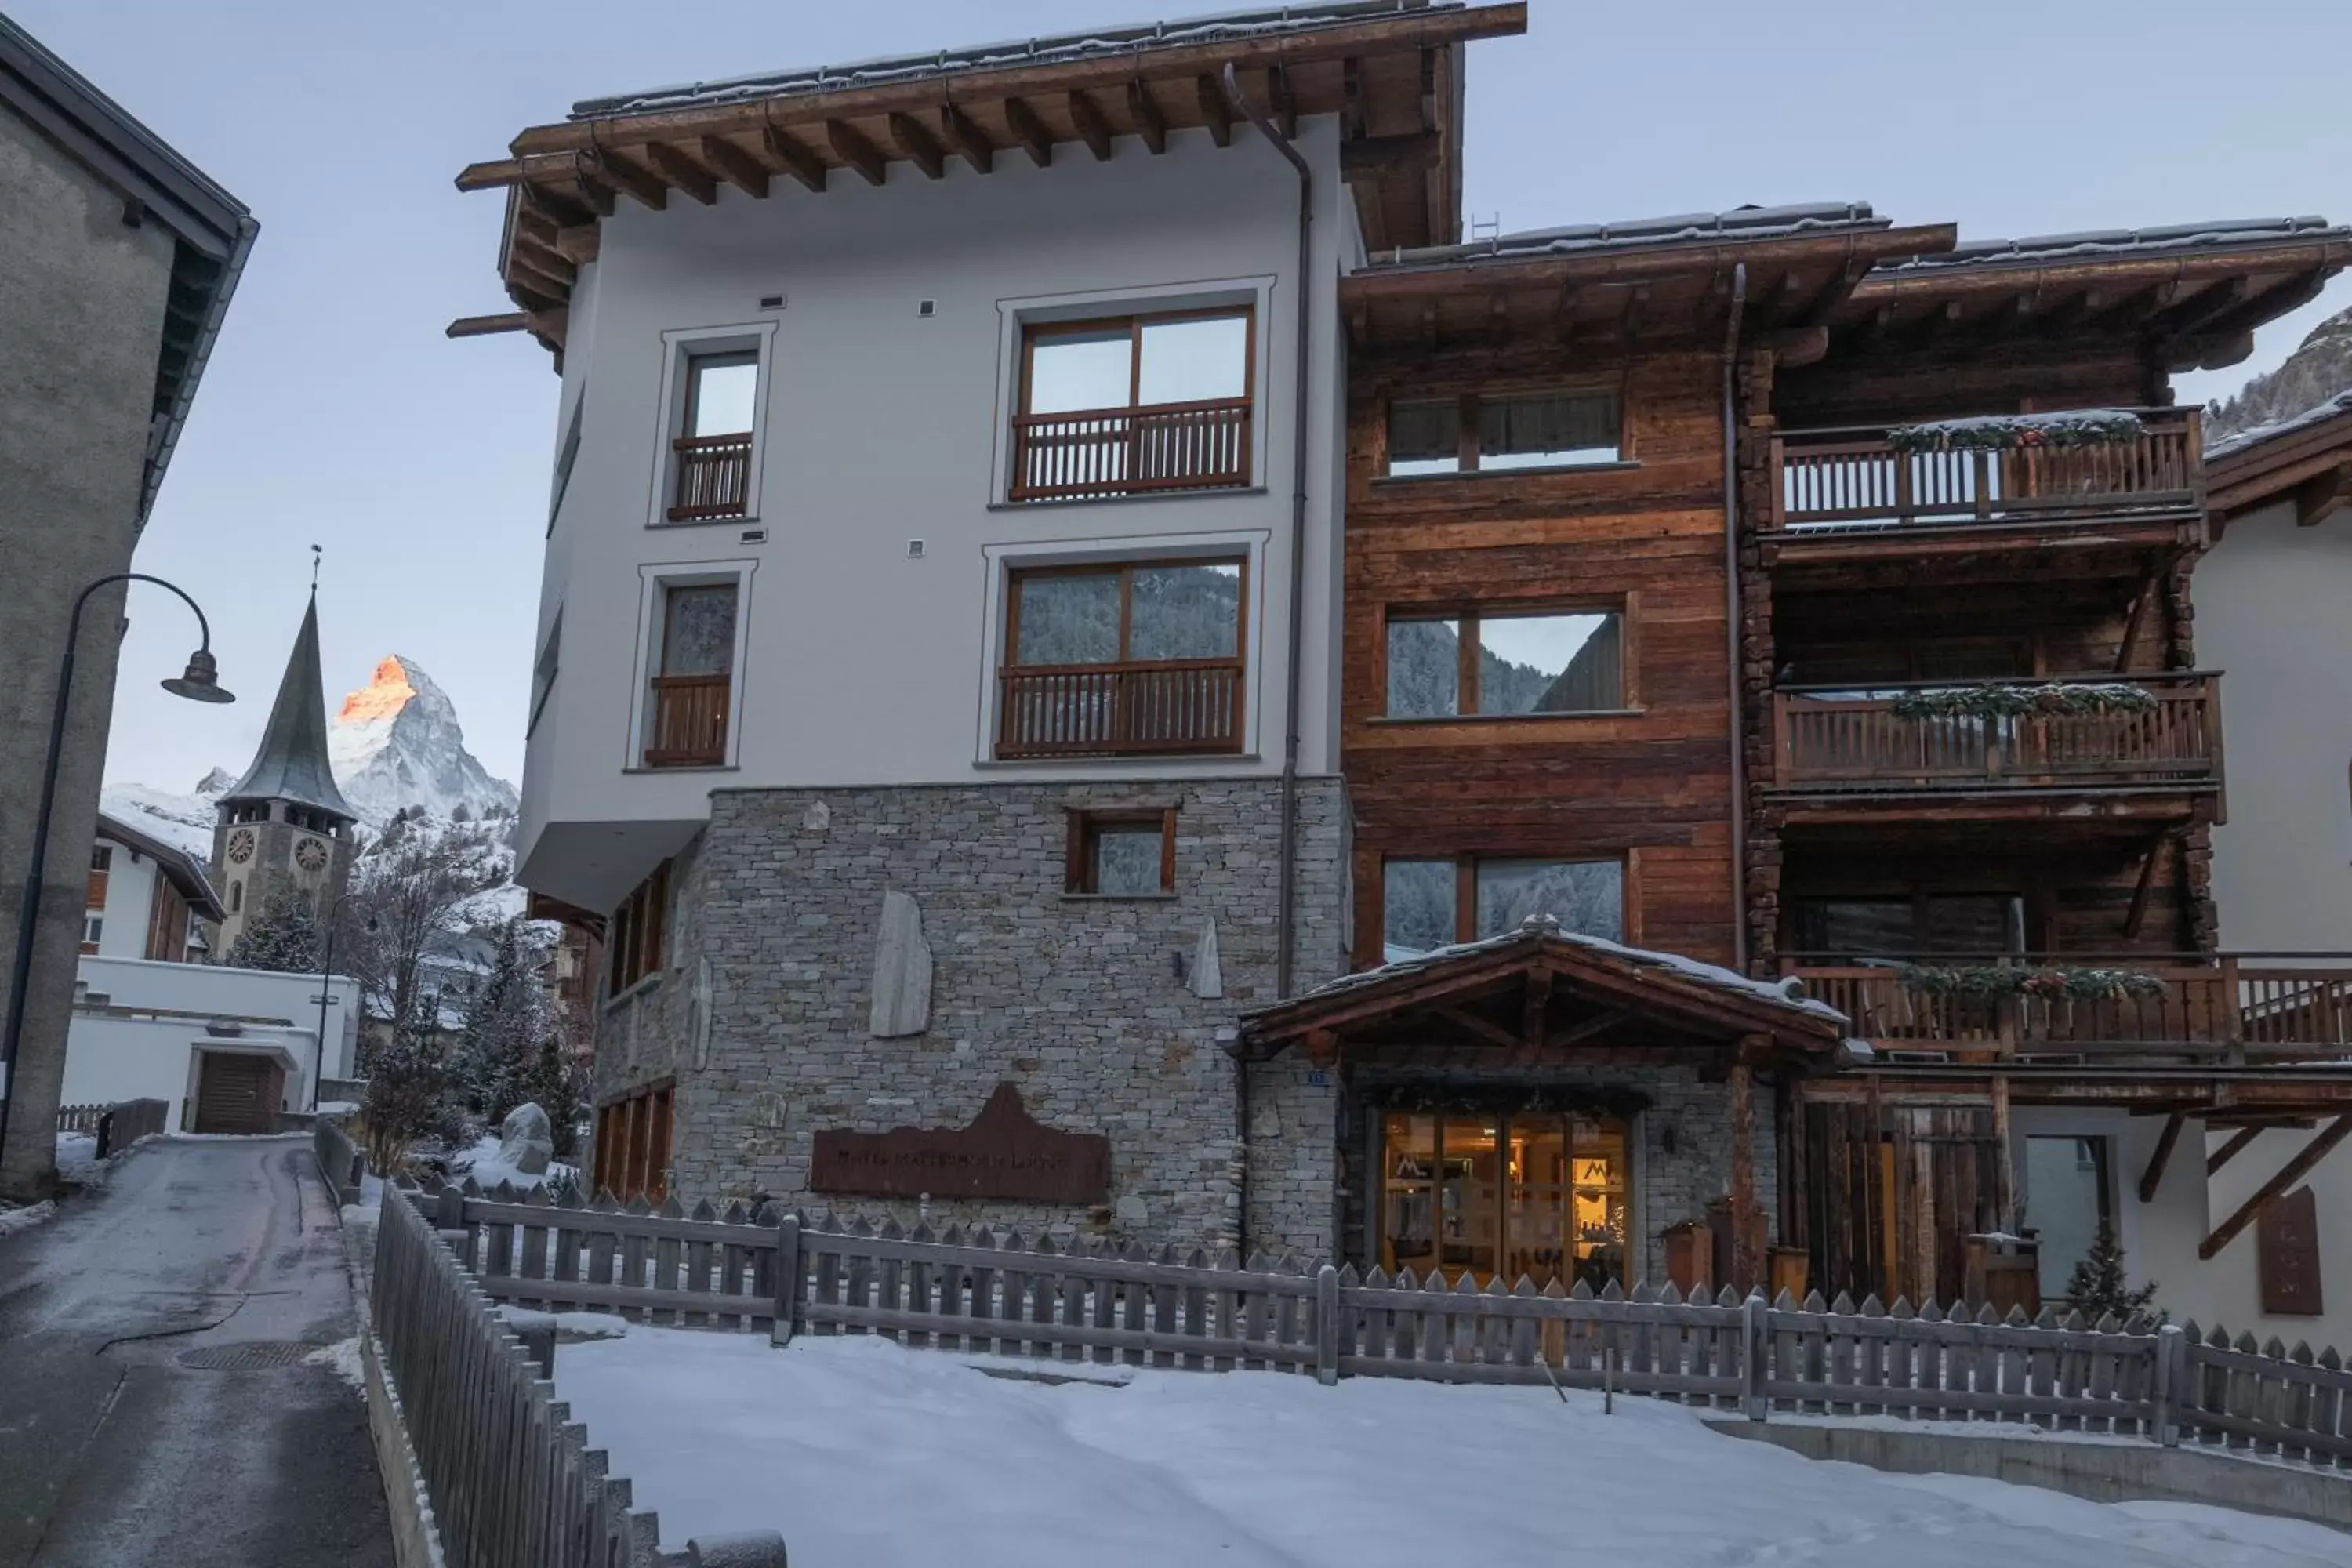 Property Building in Matterhorn Lodge Boutique Hotel & Apartments